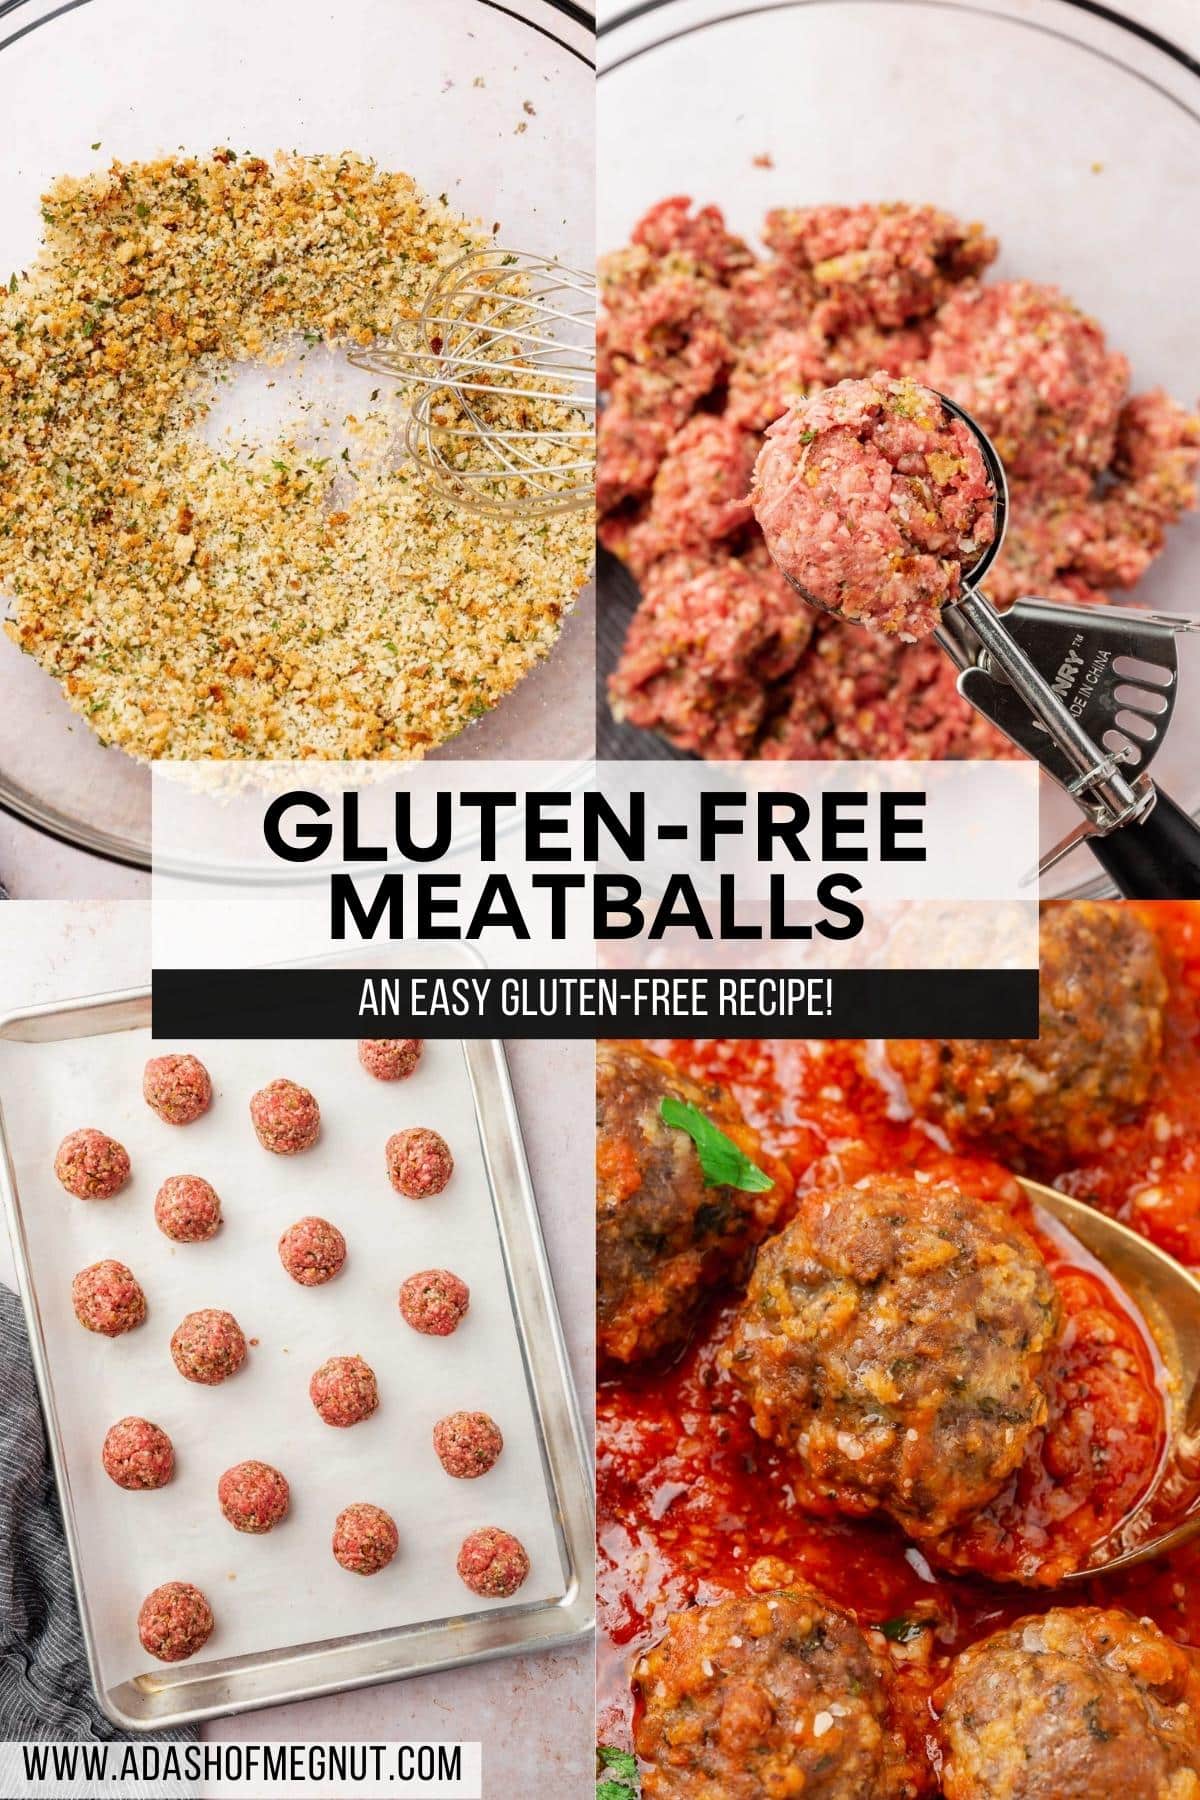 A four photo collage showing the process of making gluten-free meatballs. Photo 1: A bowl of gluten-free breadcrumbs, parmesan cheese and spices with a whisk. Photo 2: A ice cream scoop with gluten-free meatball mixture in it over a larger bowl of ground meat. Photo 3: Gluten-free meatballs on a baking sheet lined with parchment paper before baking. Photo 4: A closeup of gluten-free meatballs simmering in marinara sauce.